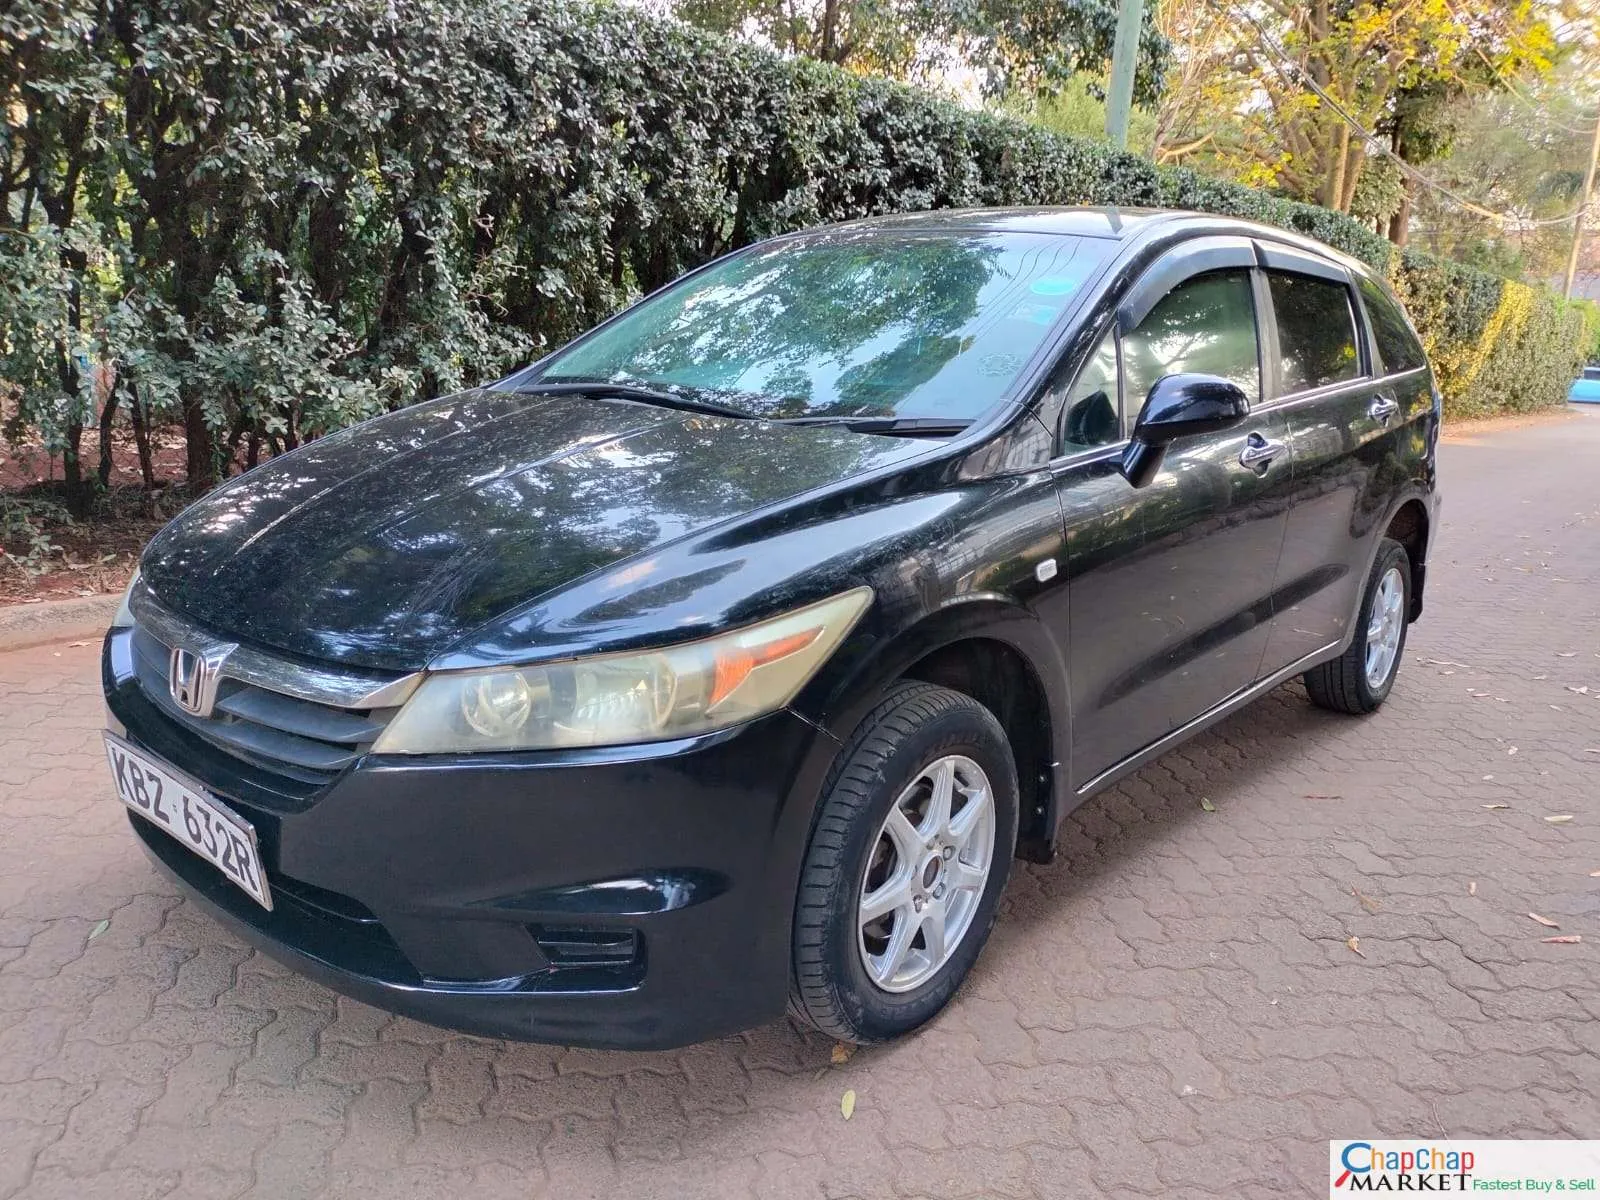 Honda Stream for sale in kenya hire purchase installments You Pay 30% Deposit stream rsz Trade in OK 1800cc EXCLUSIVE (SOLD)